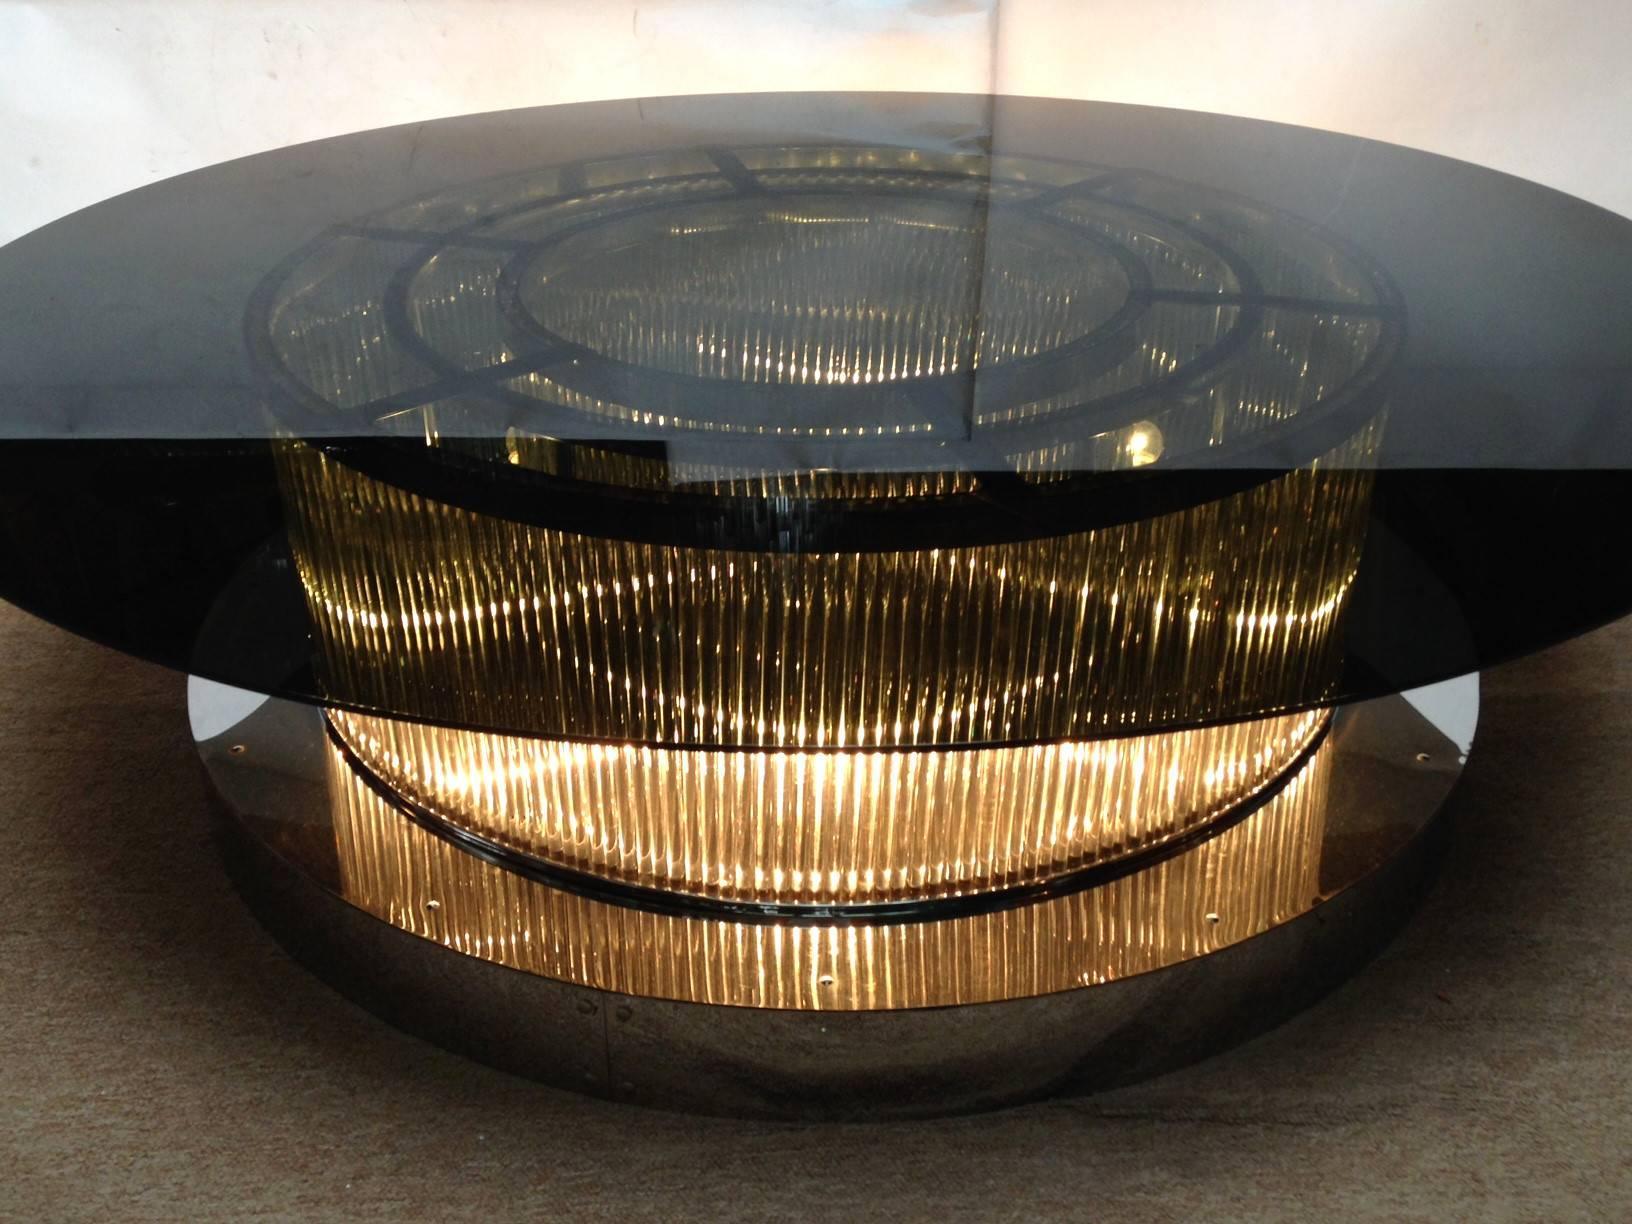 One of a kind Italian over sized crystal bars coffee table with chrome base and glass top by Fabio Bergomi for Fabio Ltd.
This table can be lit up from inside with it's six standard light sockets wired for the U.S.
Top glass diameter is 60